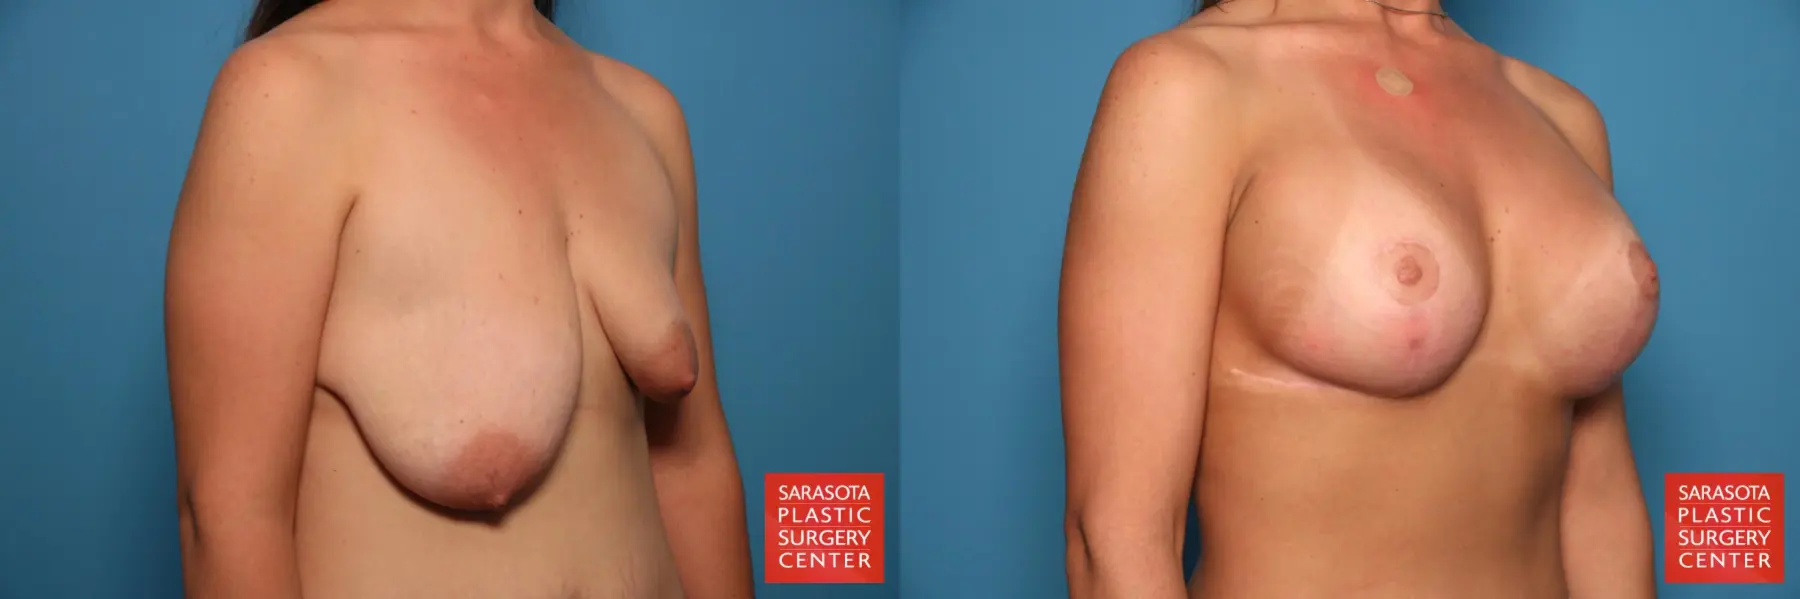 Breast Asymmetry: Patient 2 - Before and After 4